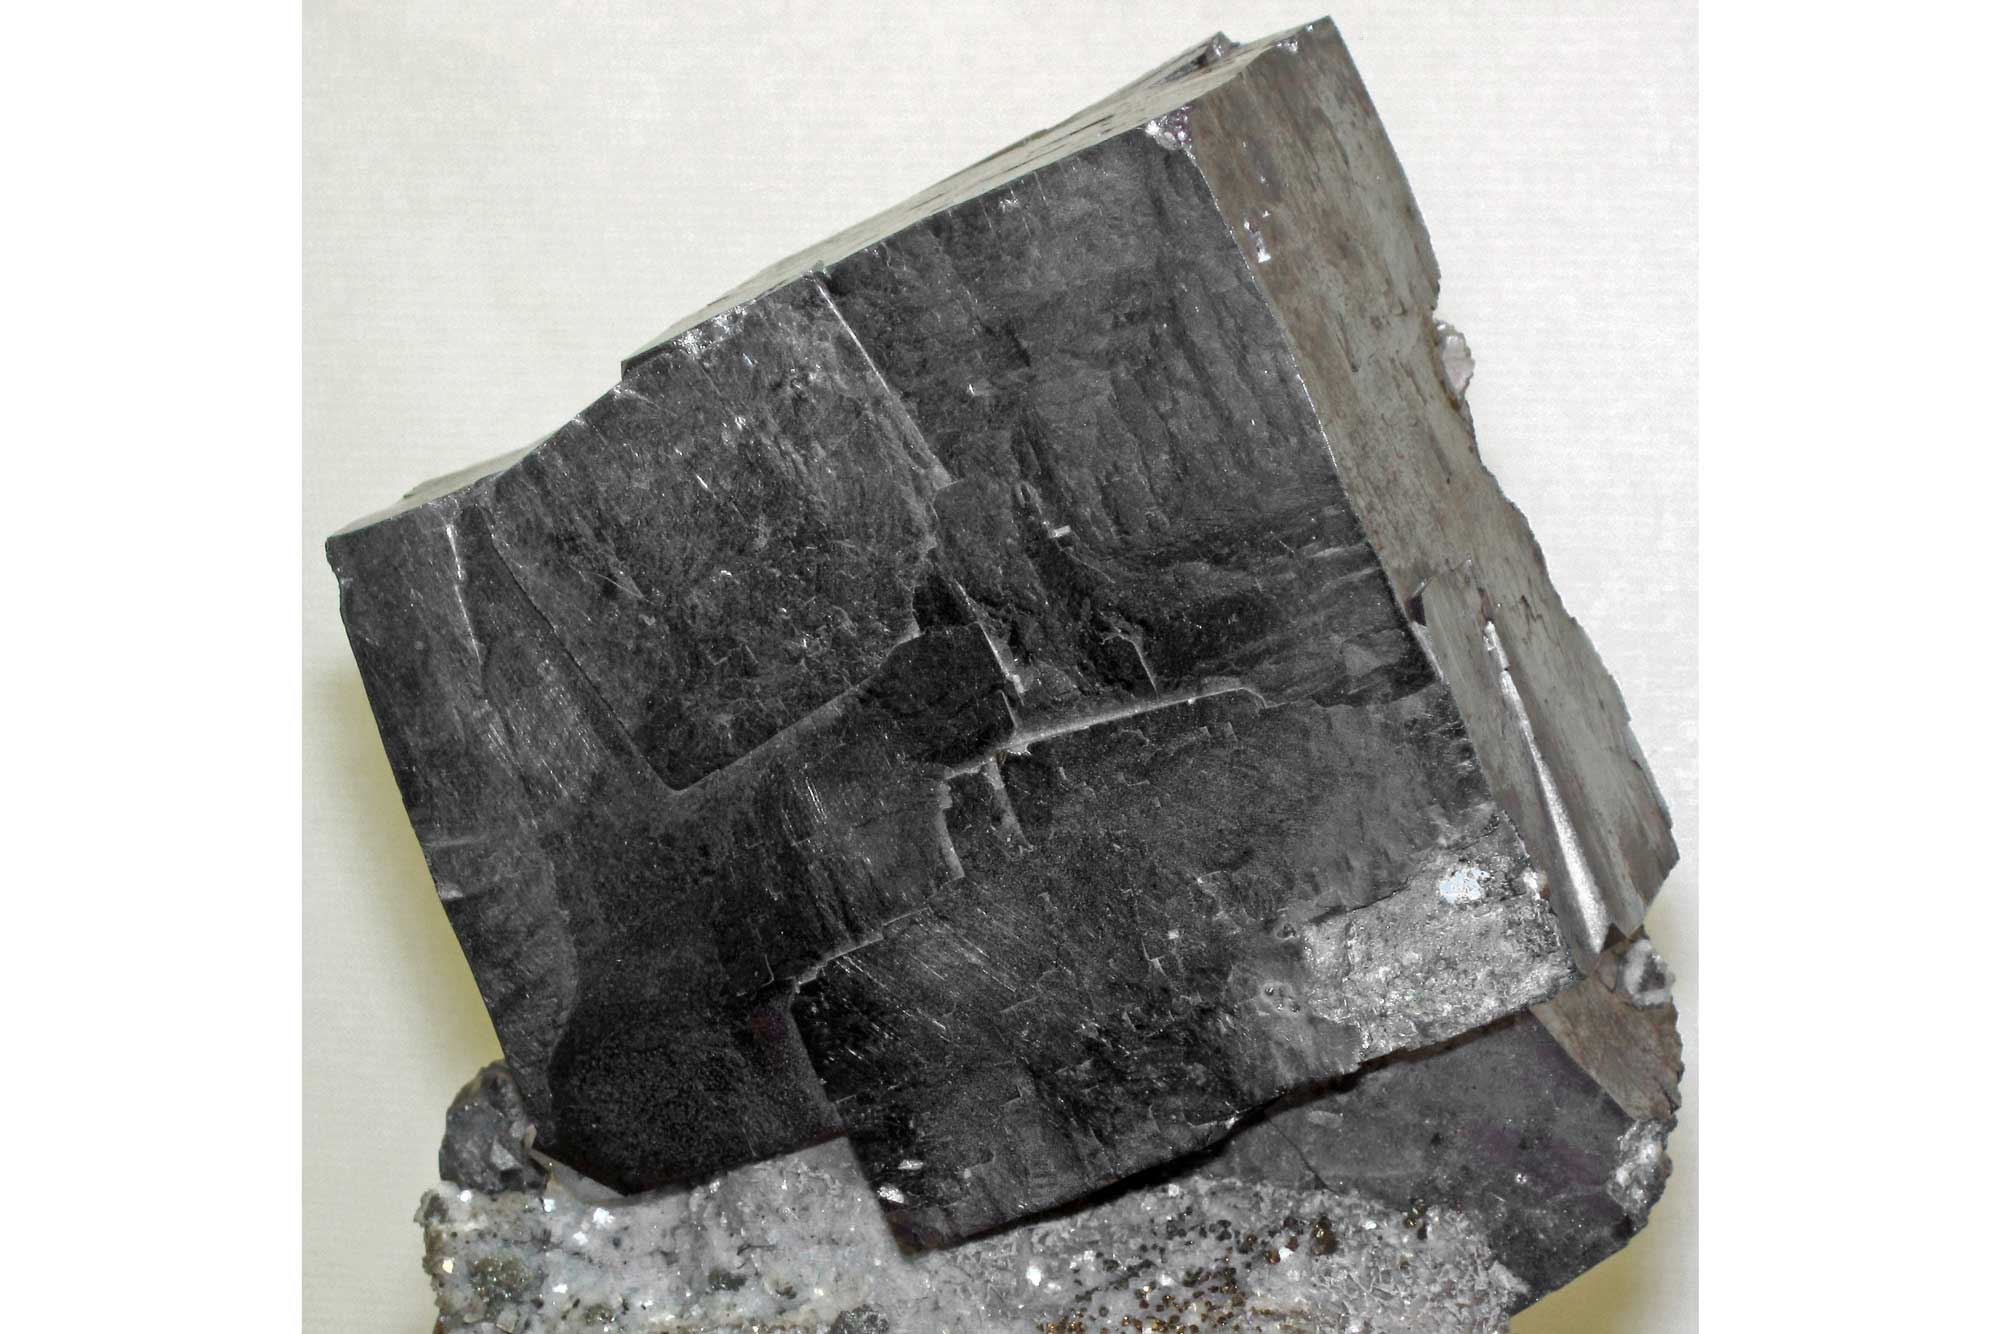 Photograph showing a sample of the mineral galena from Missouri.